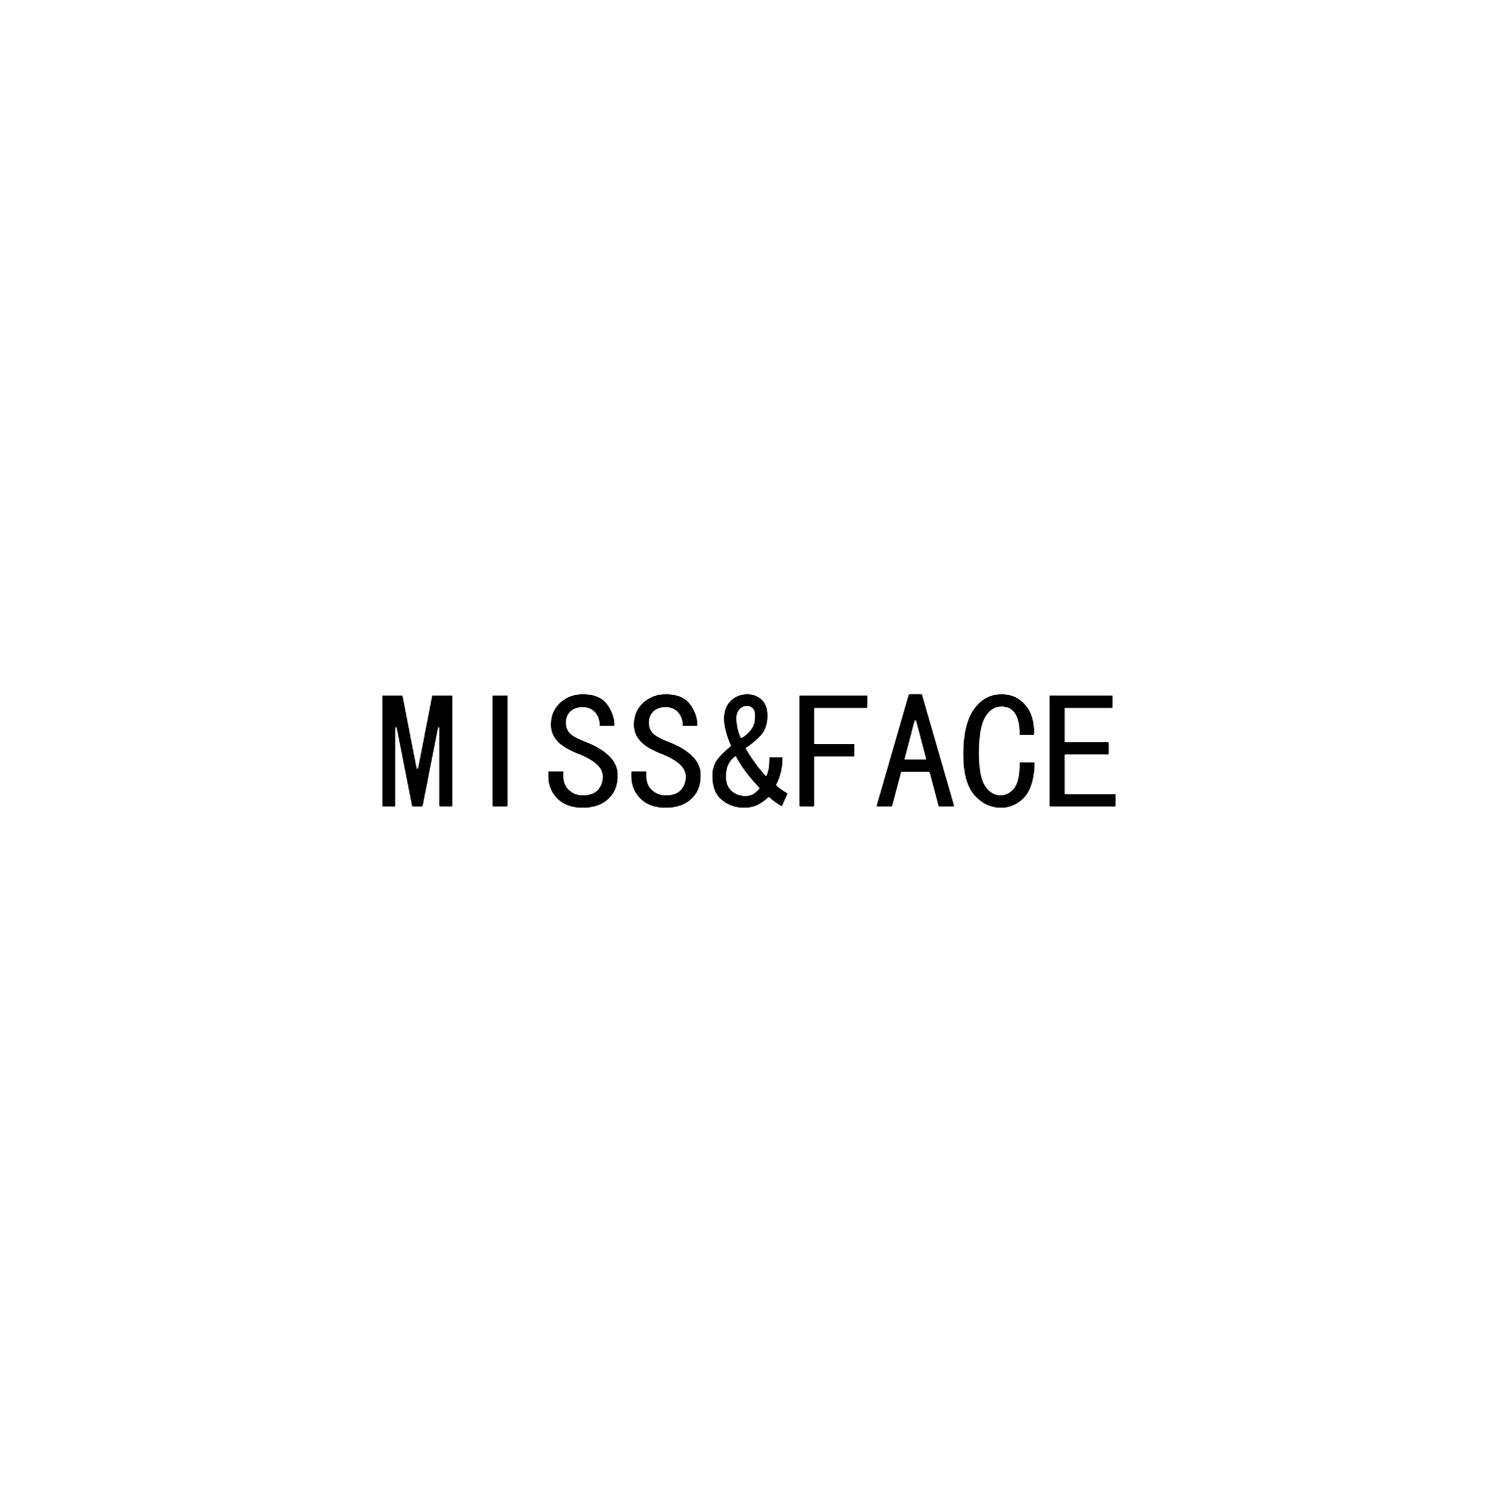 MISS＆FACE